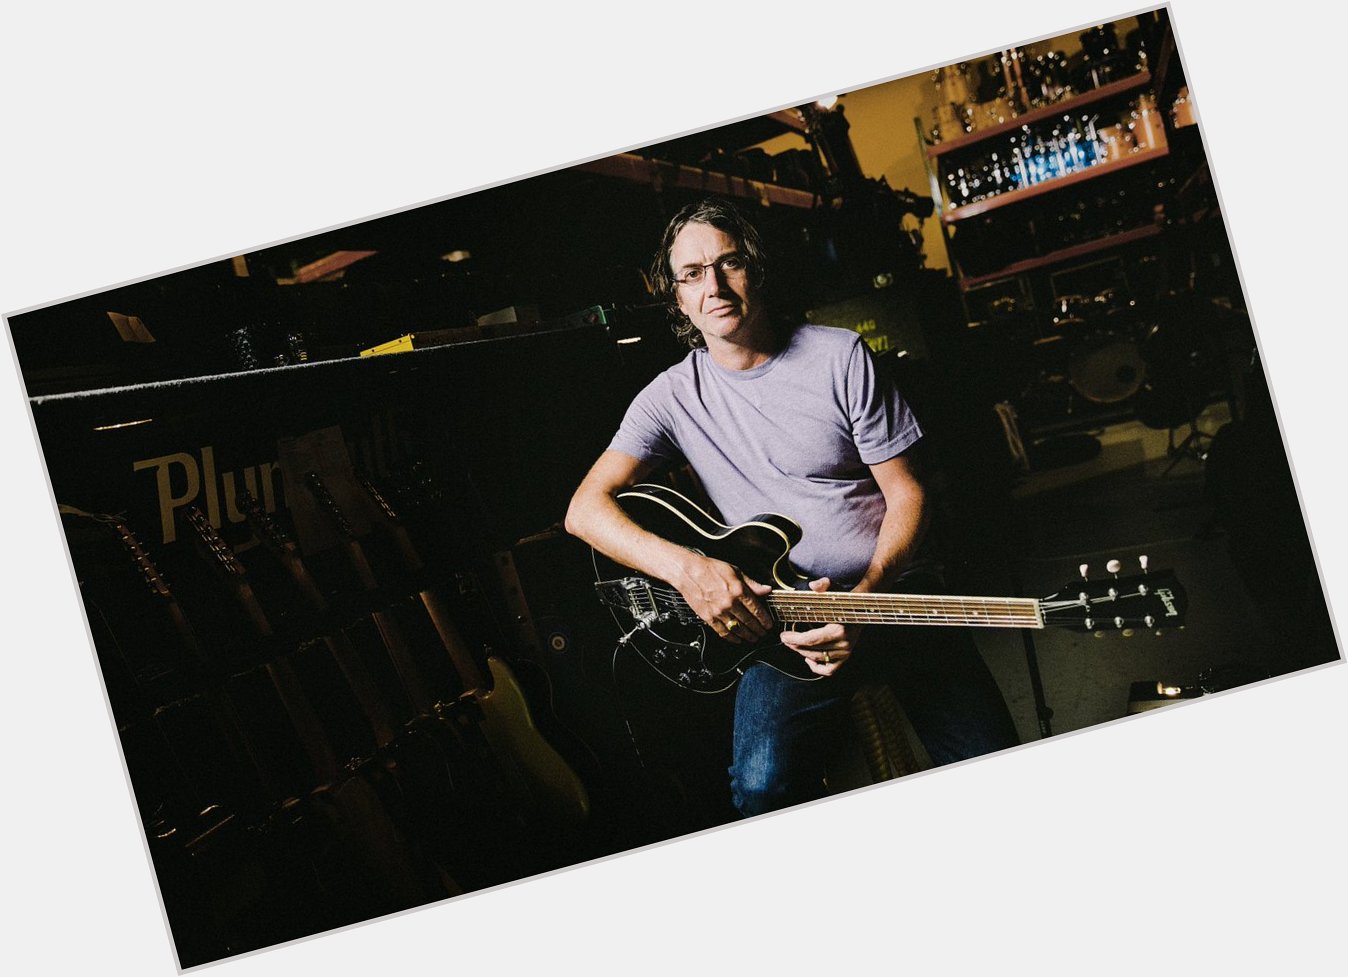 Wishing Stone Gossard a very happy birthday today What s your favourite ever Pearl Jam song? : Danny Clinch 